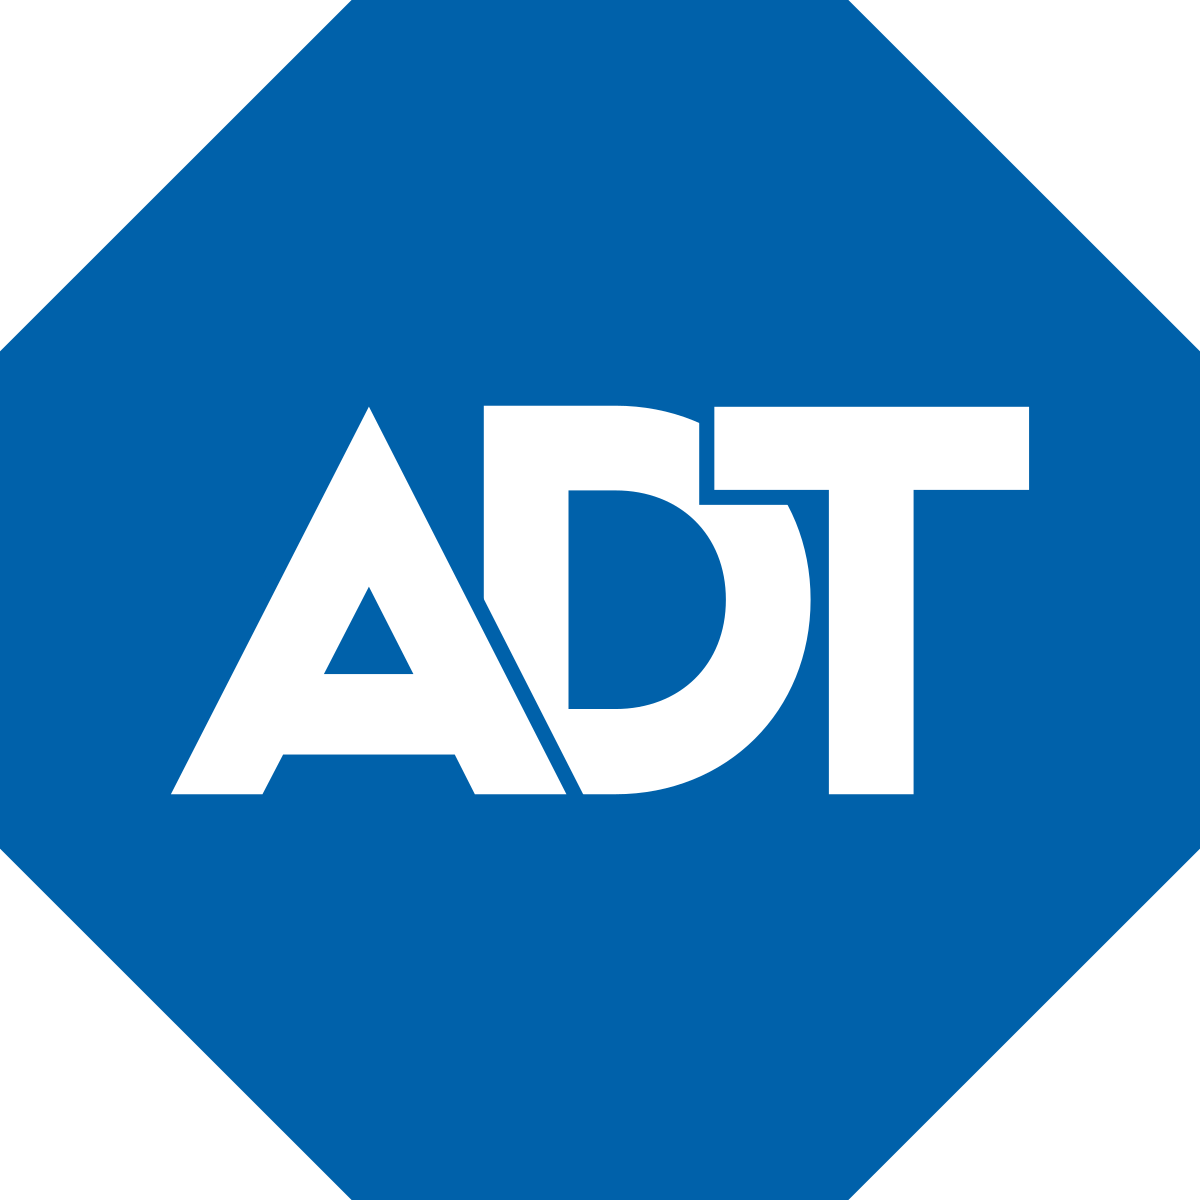 THE ADT CORPORATION